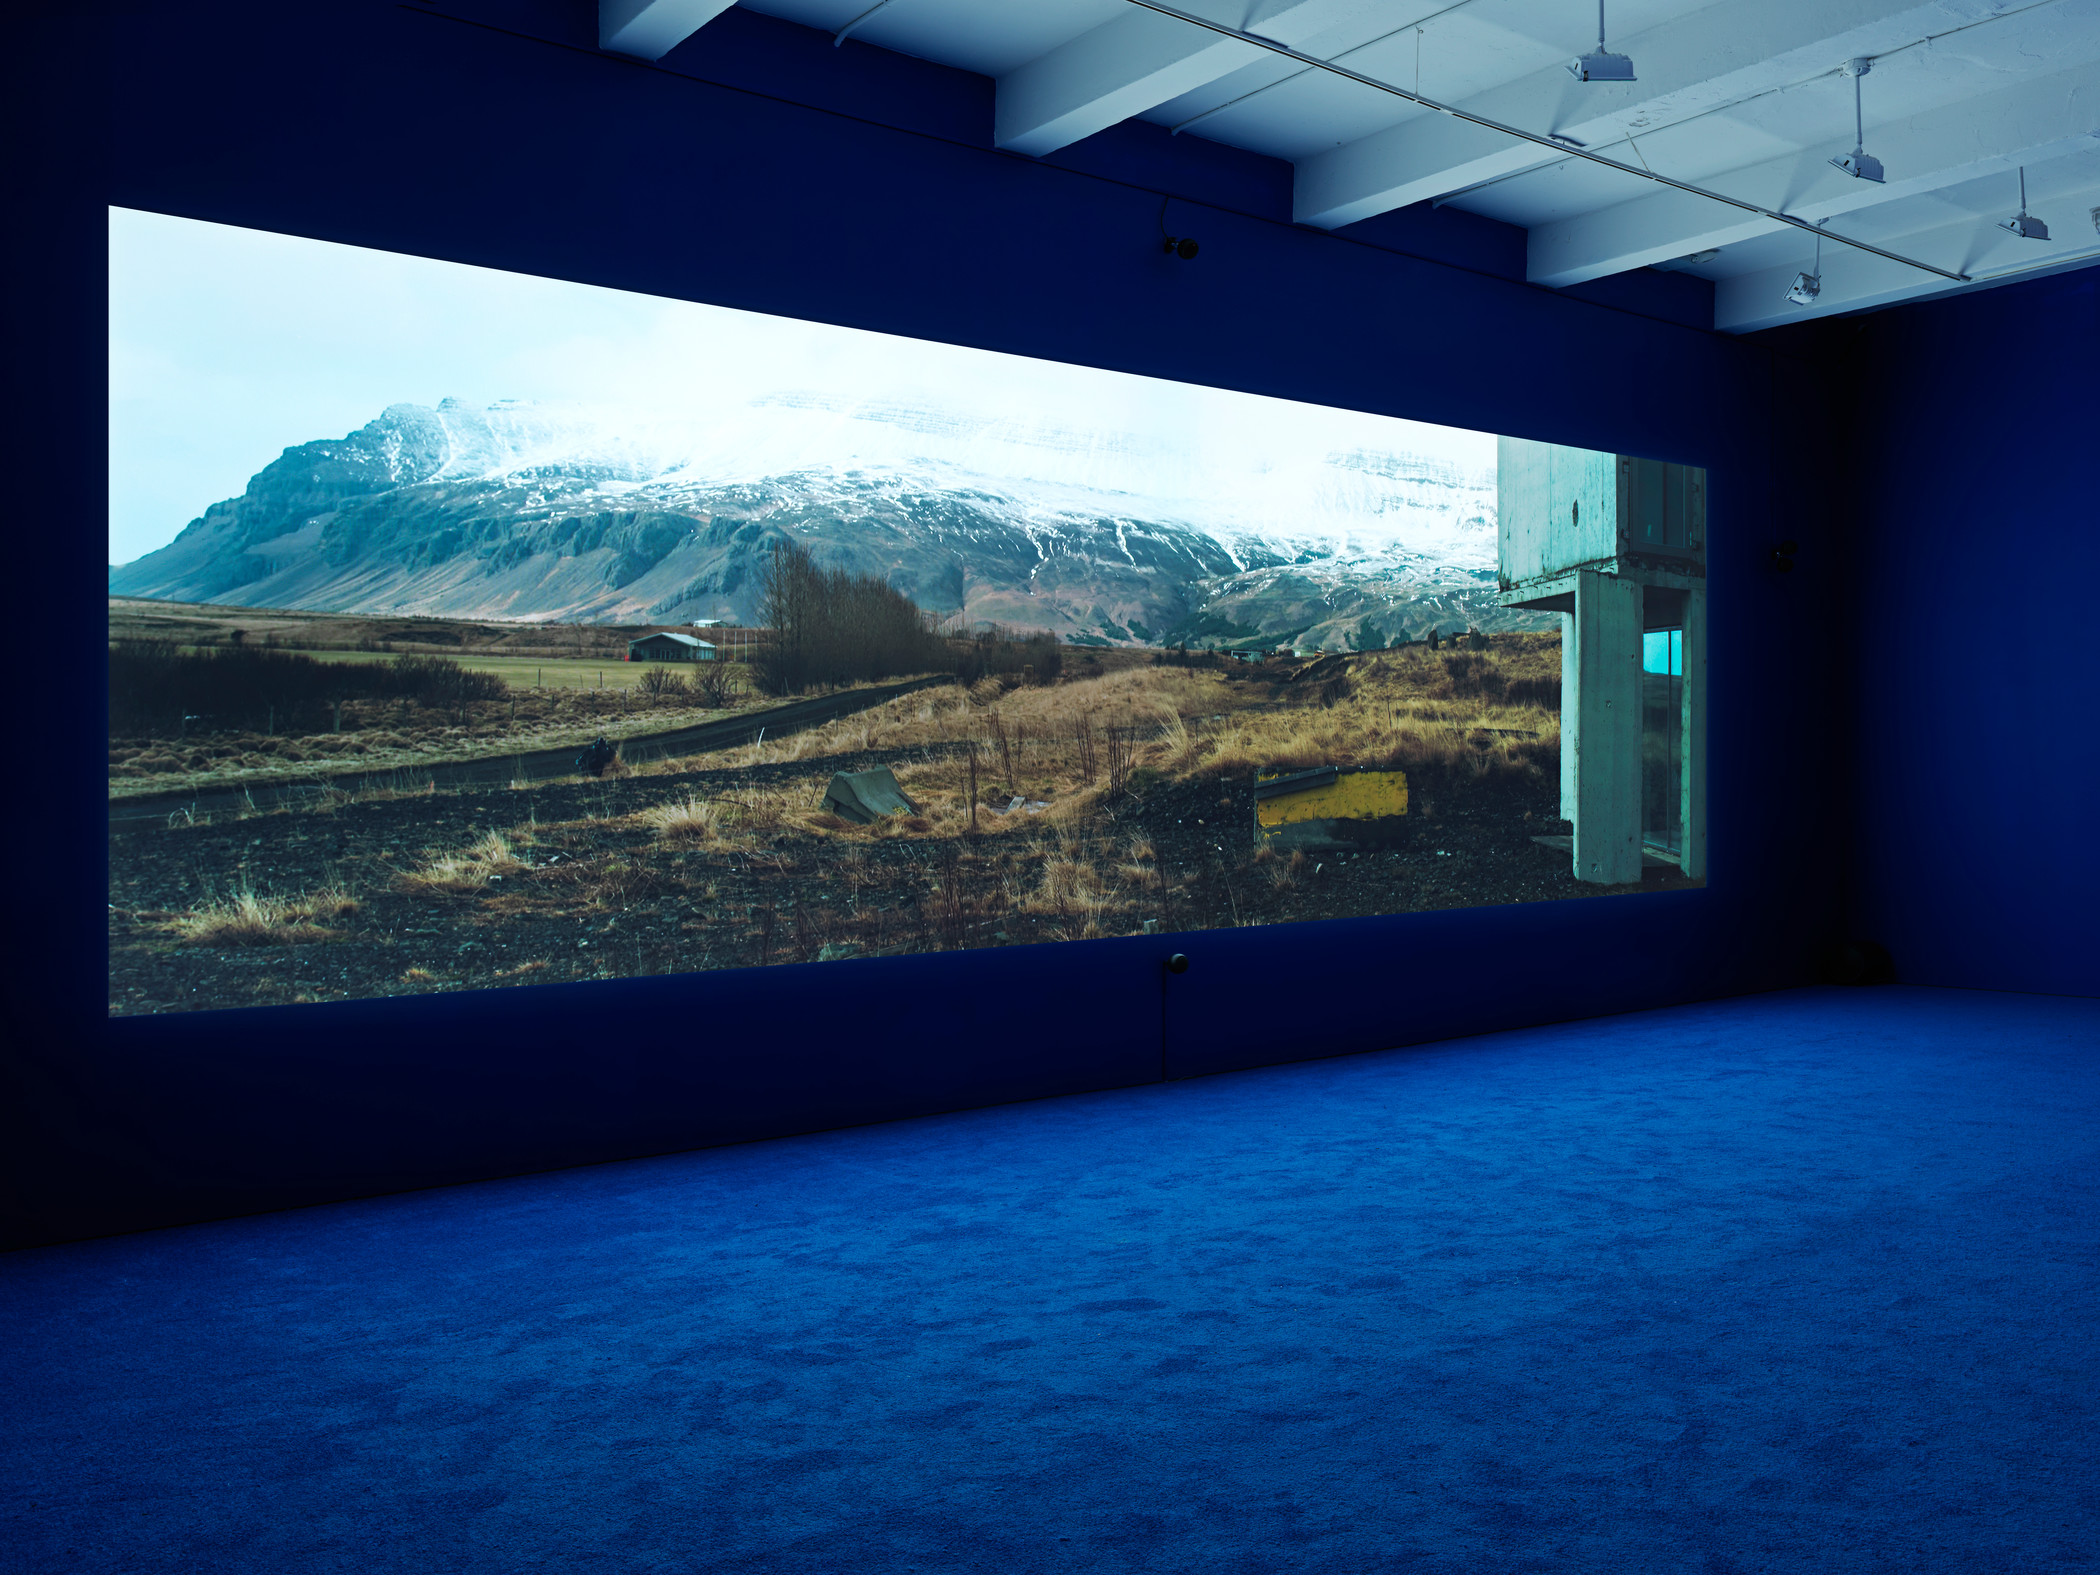  Isaac Julien, PLAYTIME, 2013, Los Angeles County Museum of Art, gift of Sheridan Brown, installation view, Metro Pictures, New York, 2013, © Isaac Julien, photo courtesy the artist and Metro Pictures, New York, photograph: Genevieve Hanson